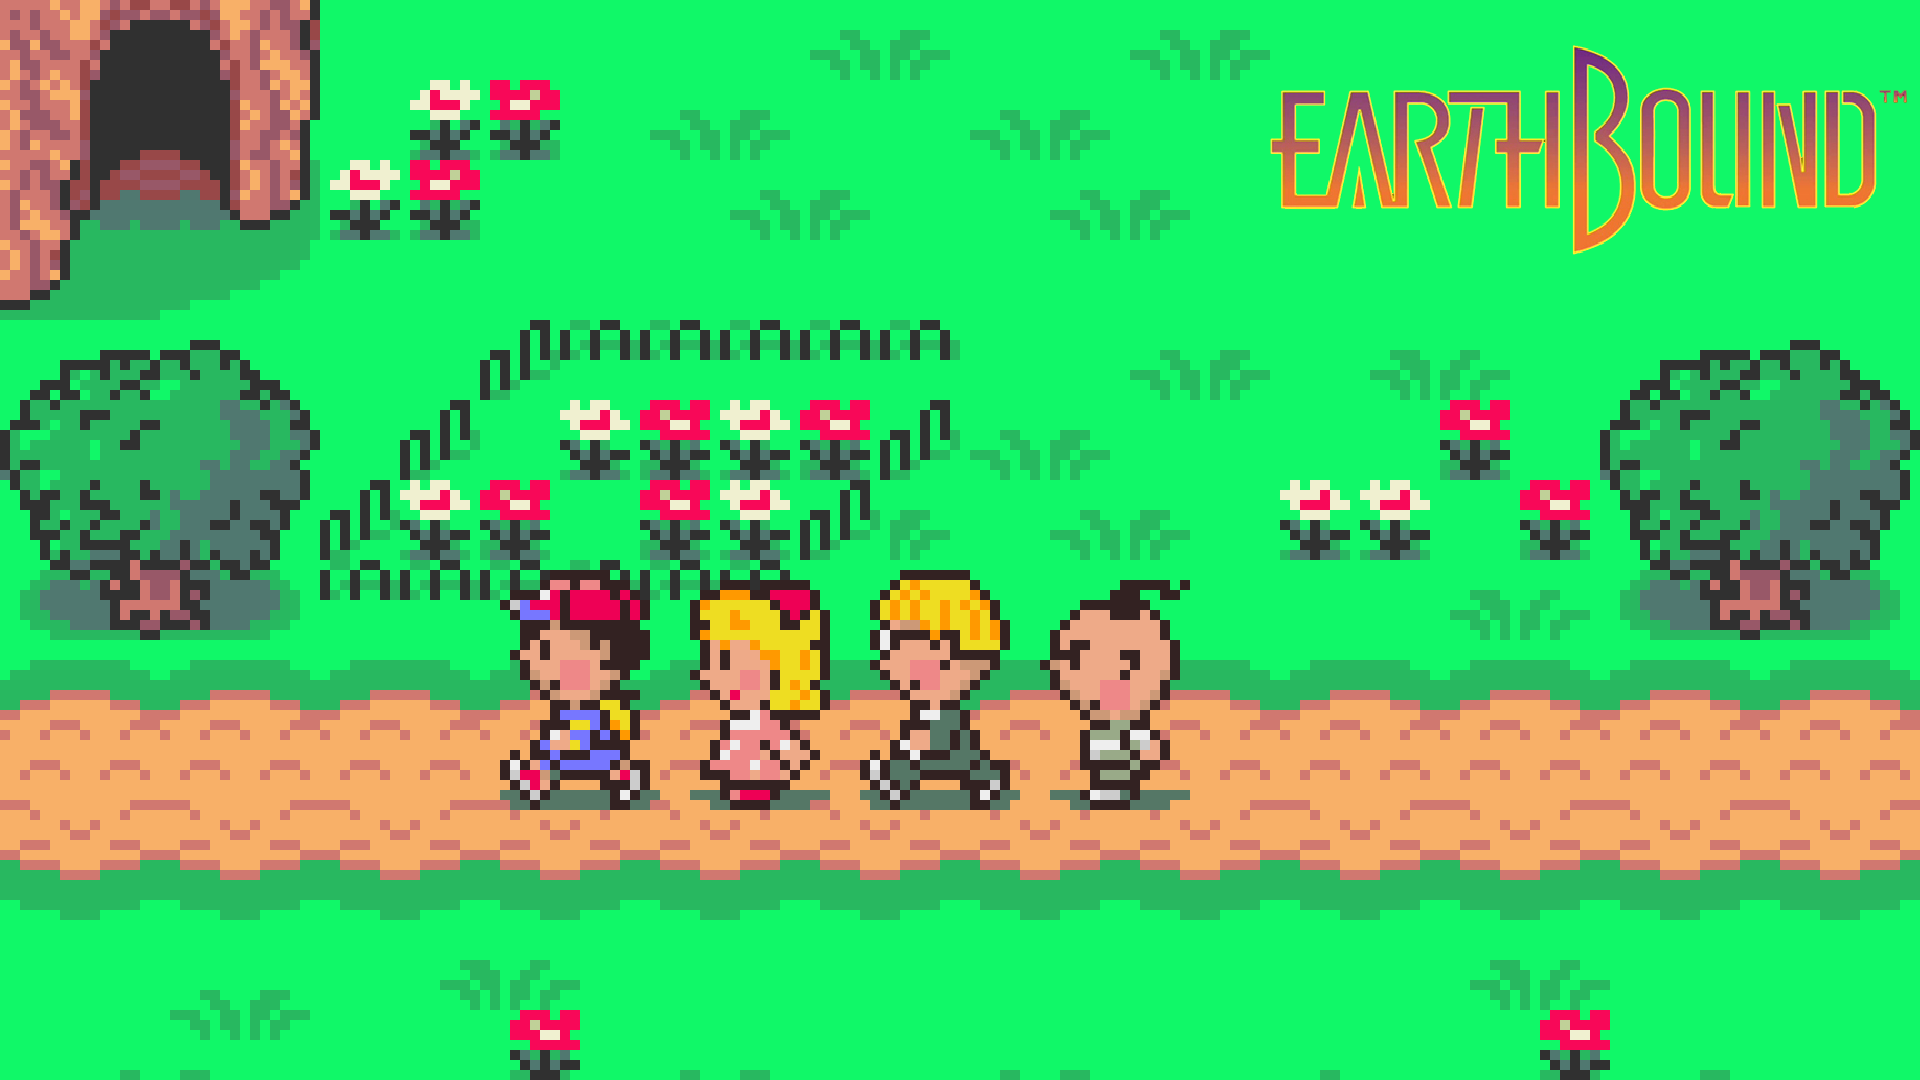 Earthbound -  ends before you can finish